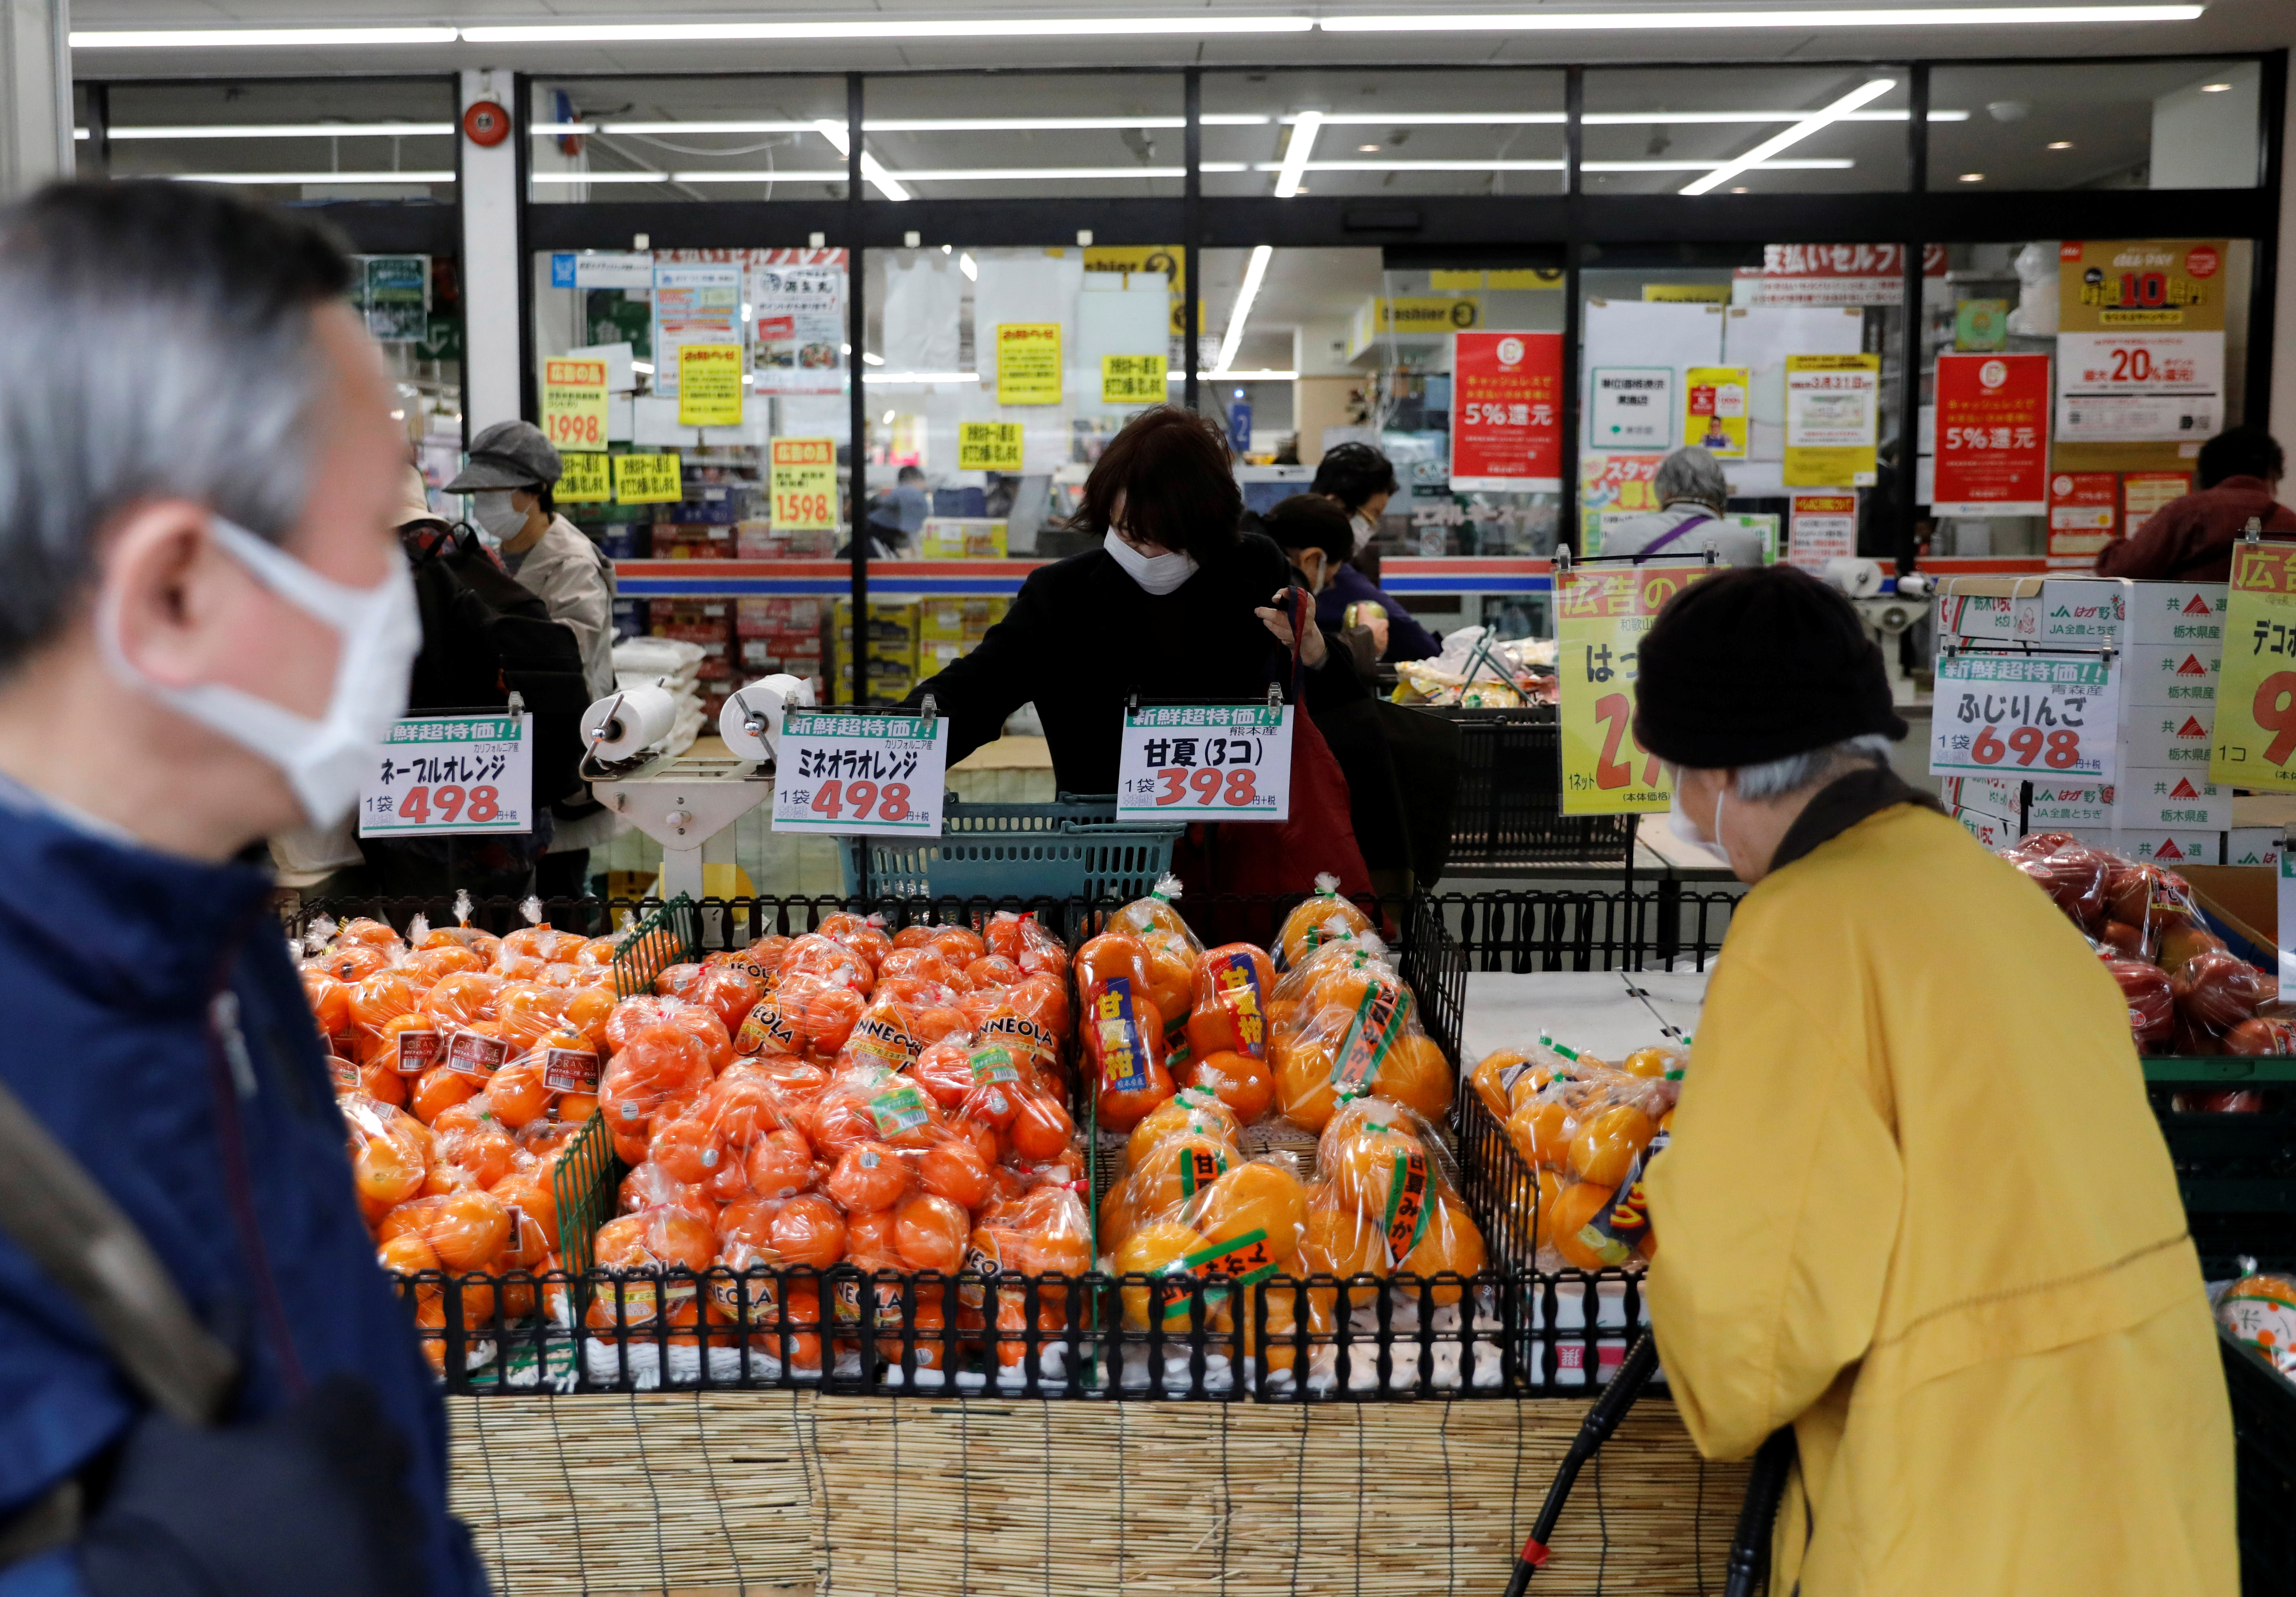 Shoppers wearing protective face masks, following an outbreak of the coronavirus disease, are seen at a supermarket in Tokyo, Japan